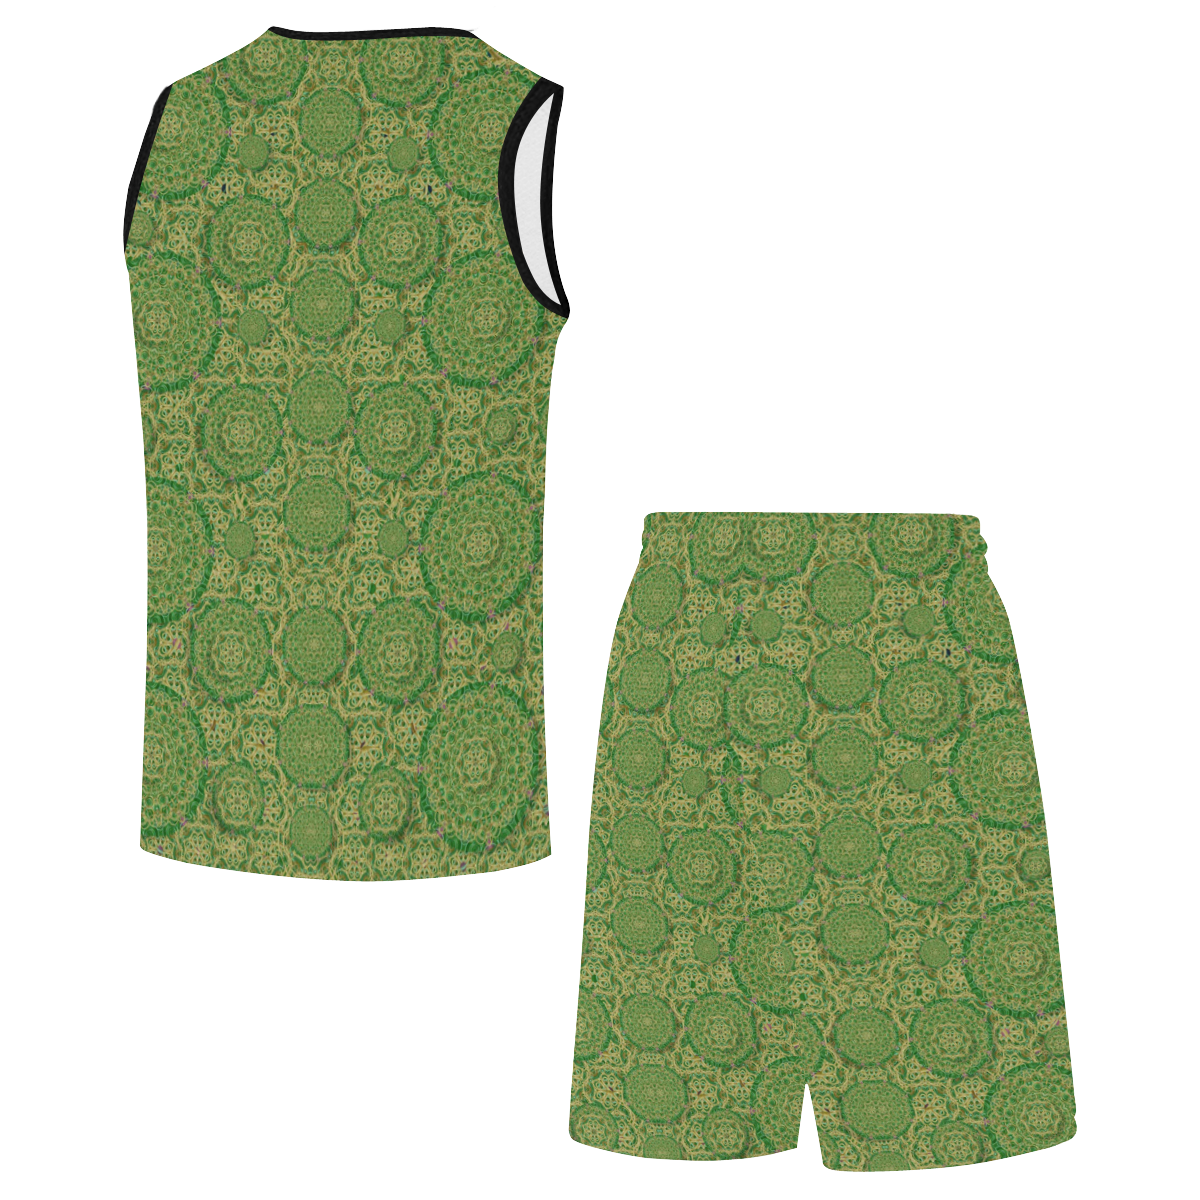 Stars in the wooden forest night in green All Over Print Basketball Uniform